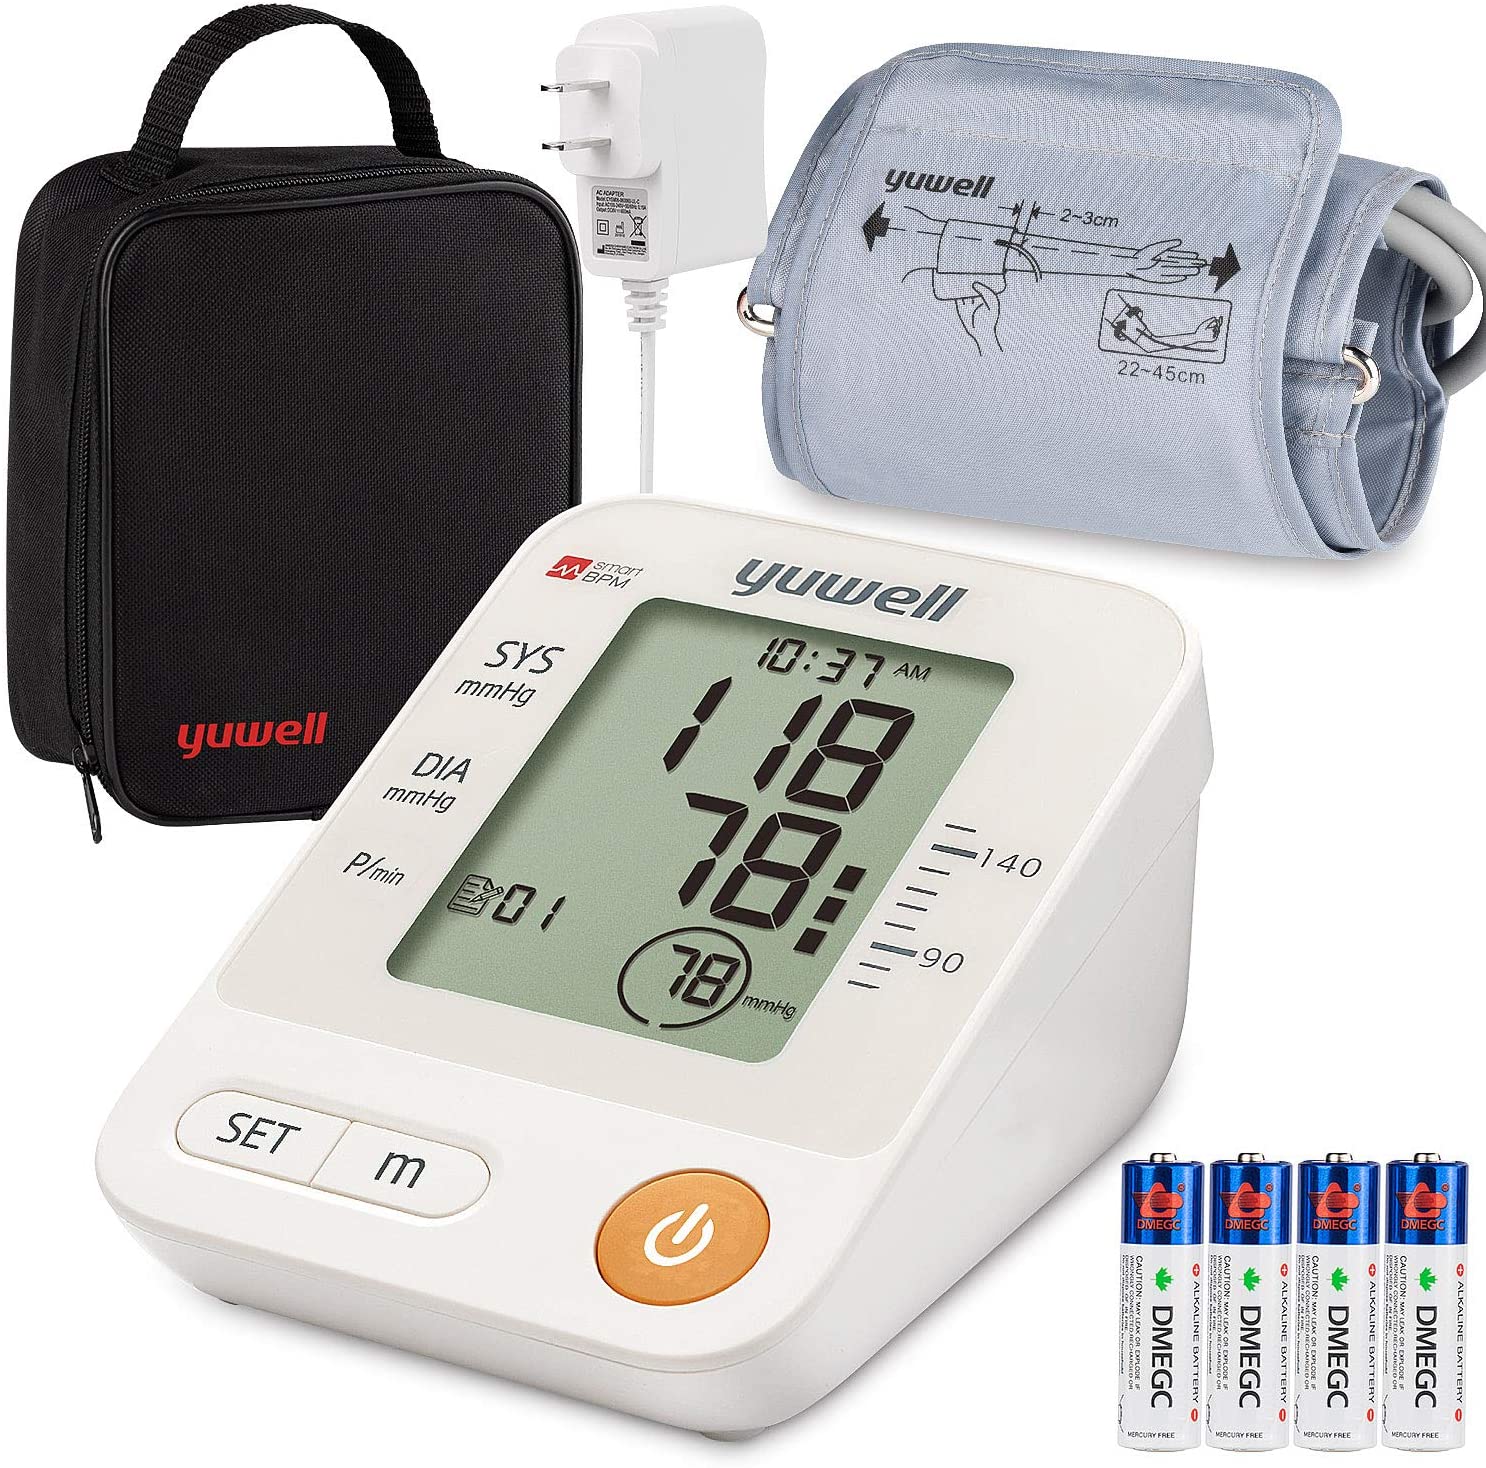 to show the blood pressure monitor available